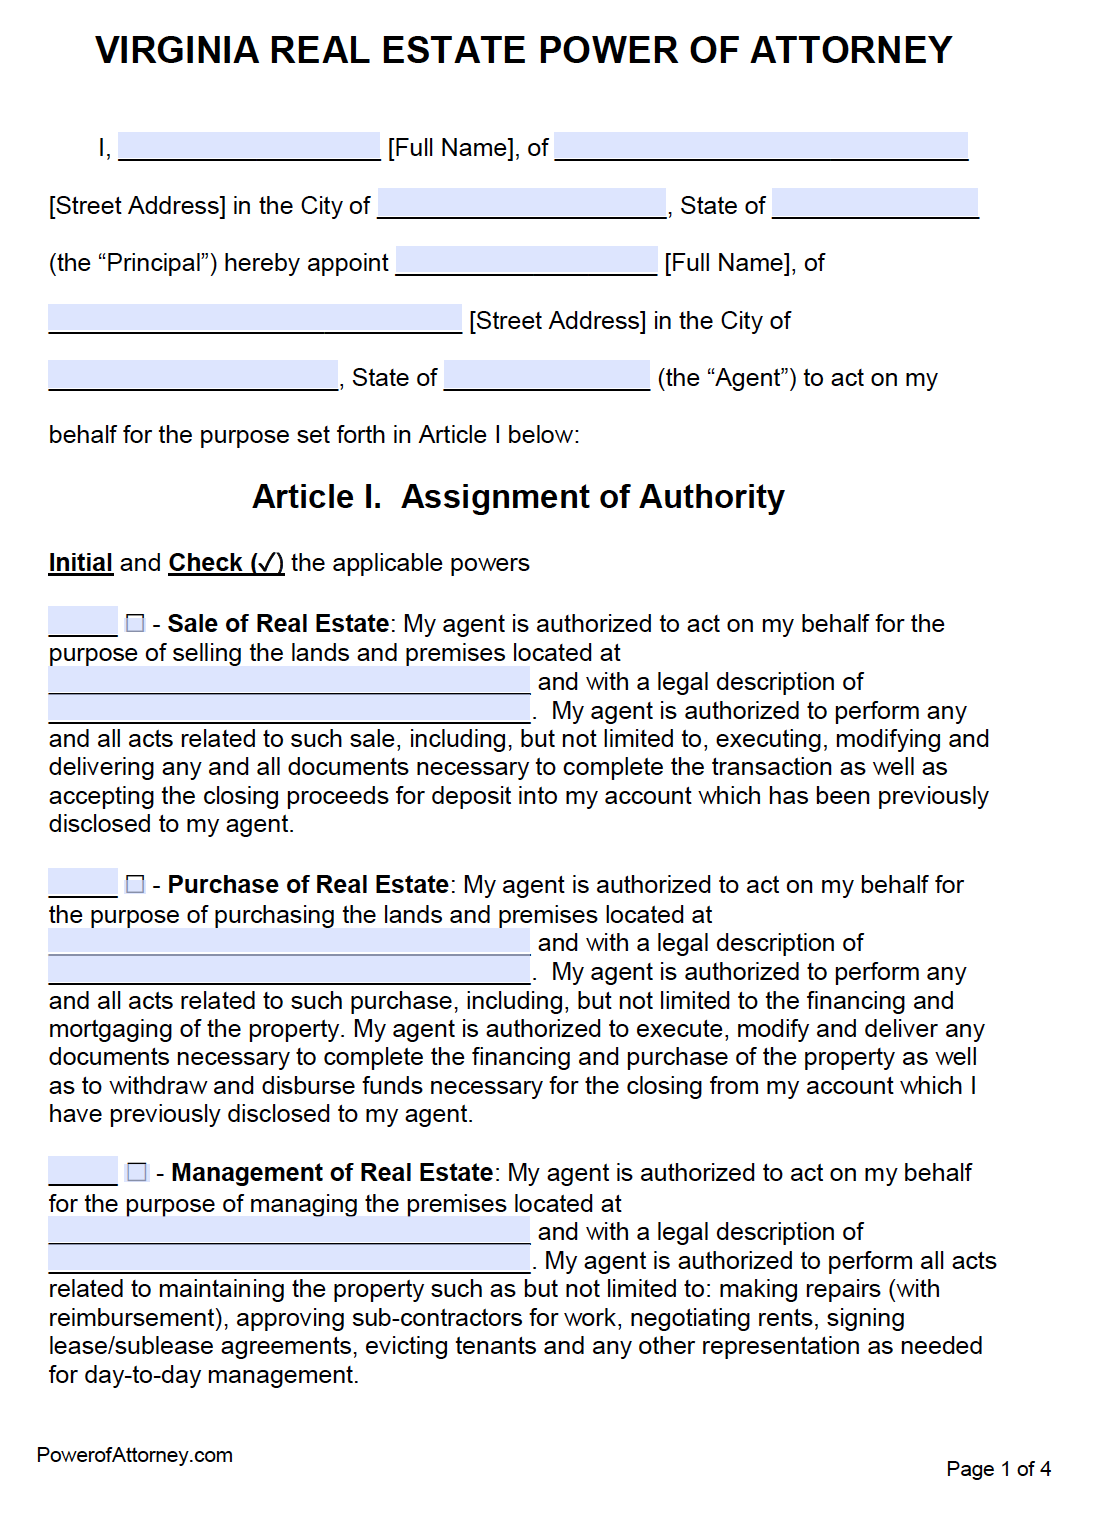 free-virginia-power-of-attorney-forms-pdf-templates